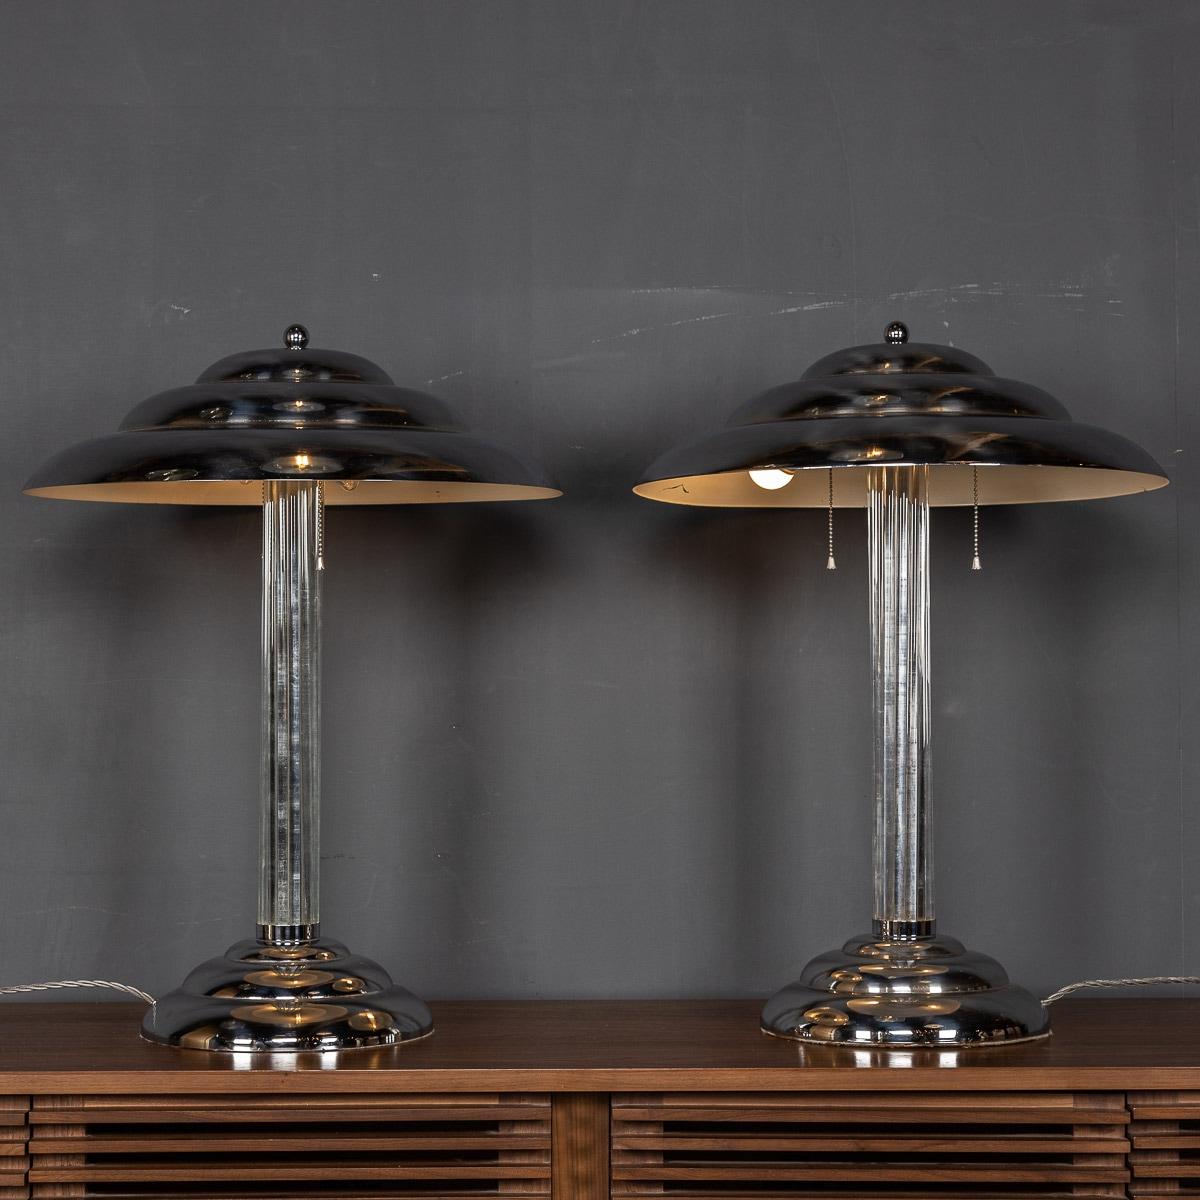 20th Century pair of American Art Deco table lamps in chrome with glass rod detail. Each lamp has two bulbs and a chain pull switch, c.1930s

Condition
In great condition - wear and tear consistent with age.

Size
Diameter: 50cm
Height: 67cm.